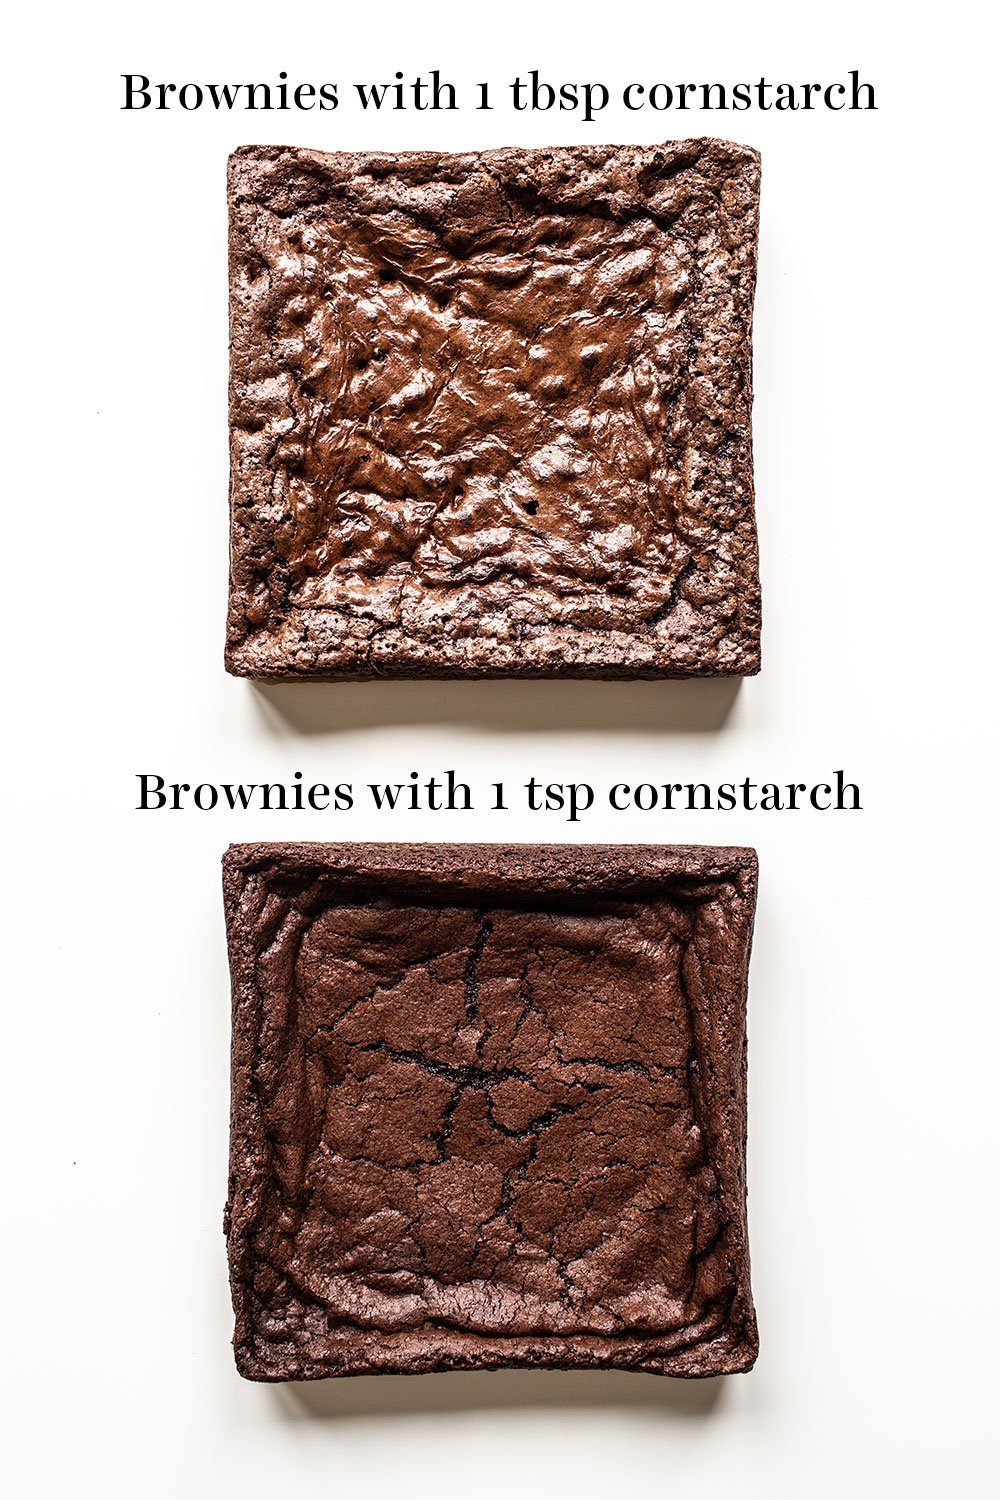 two full slabs of baked brownies, one made without cornstarch and the other made with, to compare how much shinier the crust is on the pan made with cornstarch.